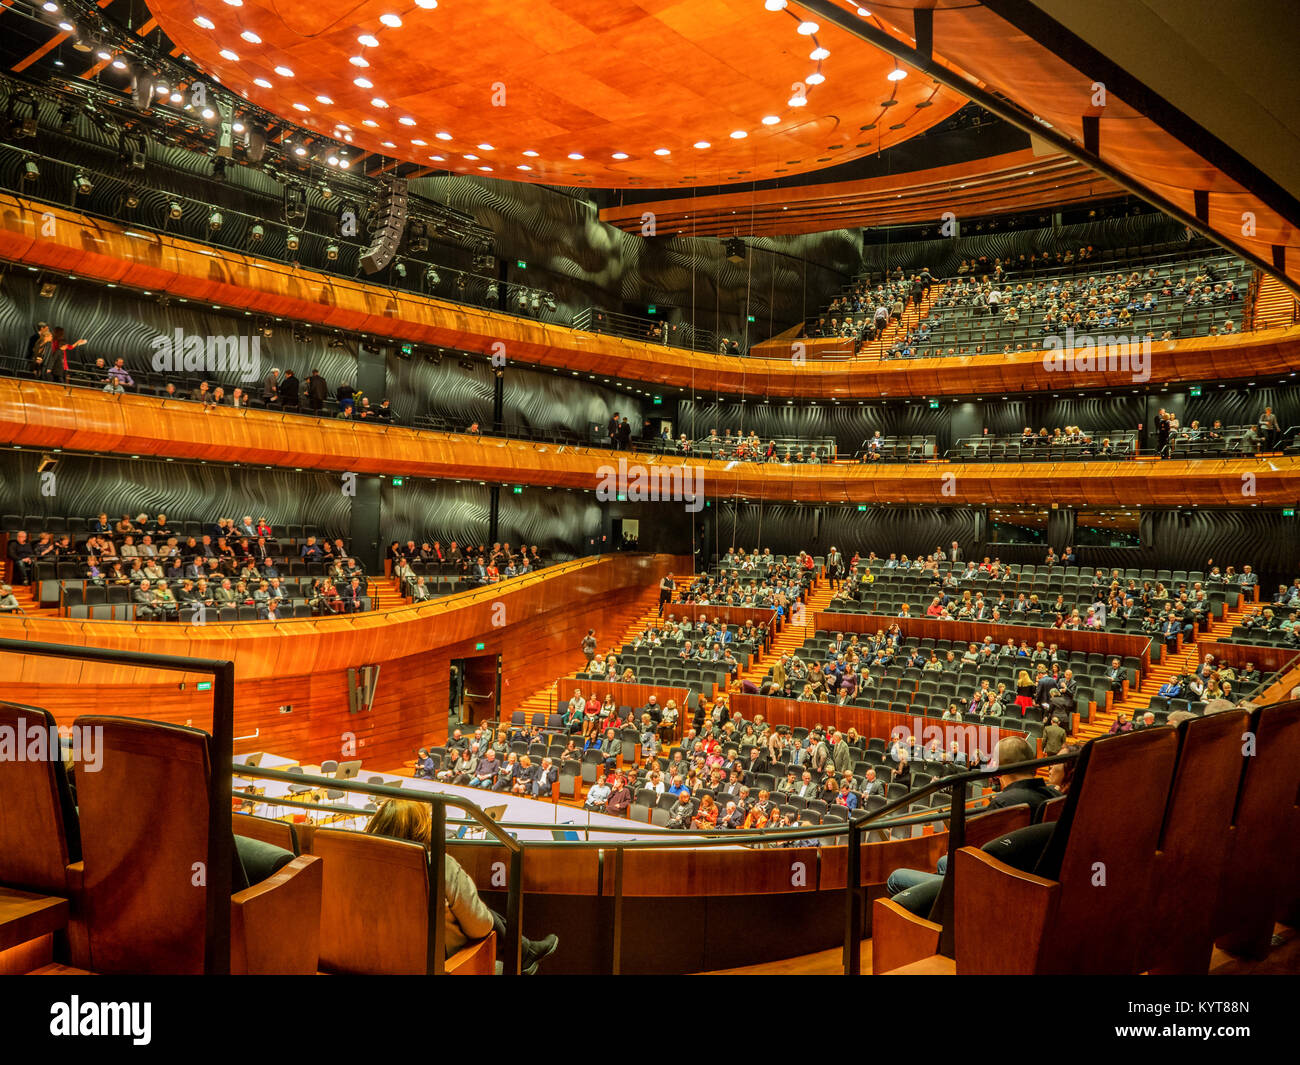 KATOWICE, POLAND – FEBRUARY 2, 2017: Interior and auditorium of modern concert hall of the National Symphonic Orchestra of Polish Radio (NOSPR) in Kat Stock Photo